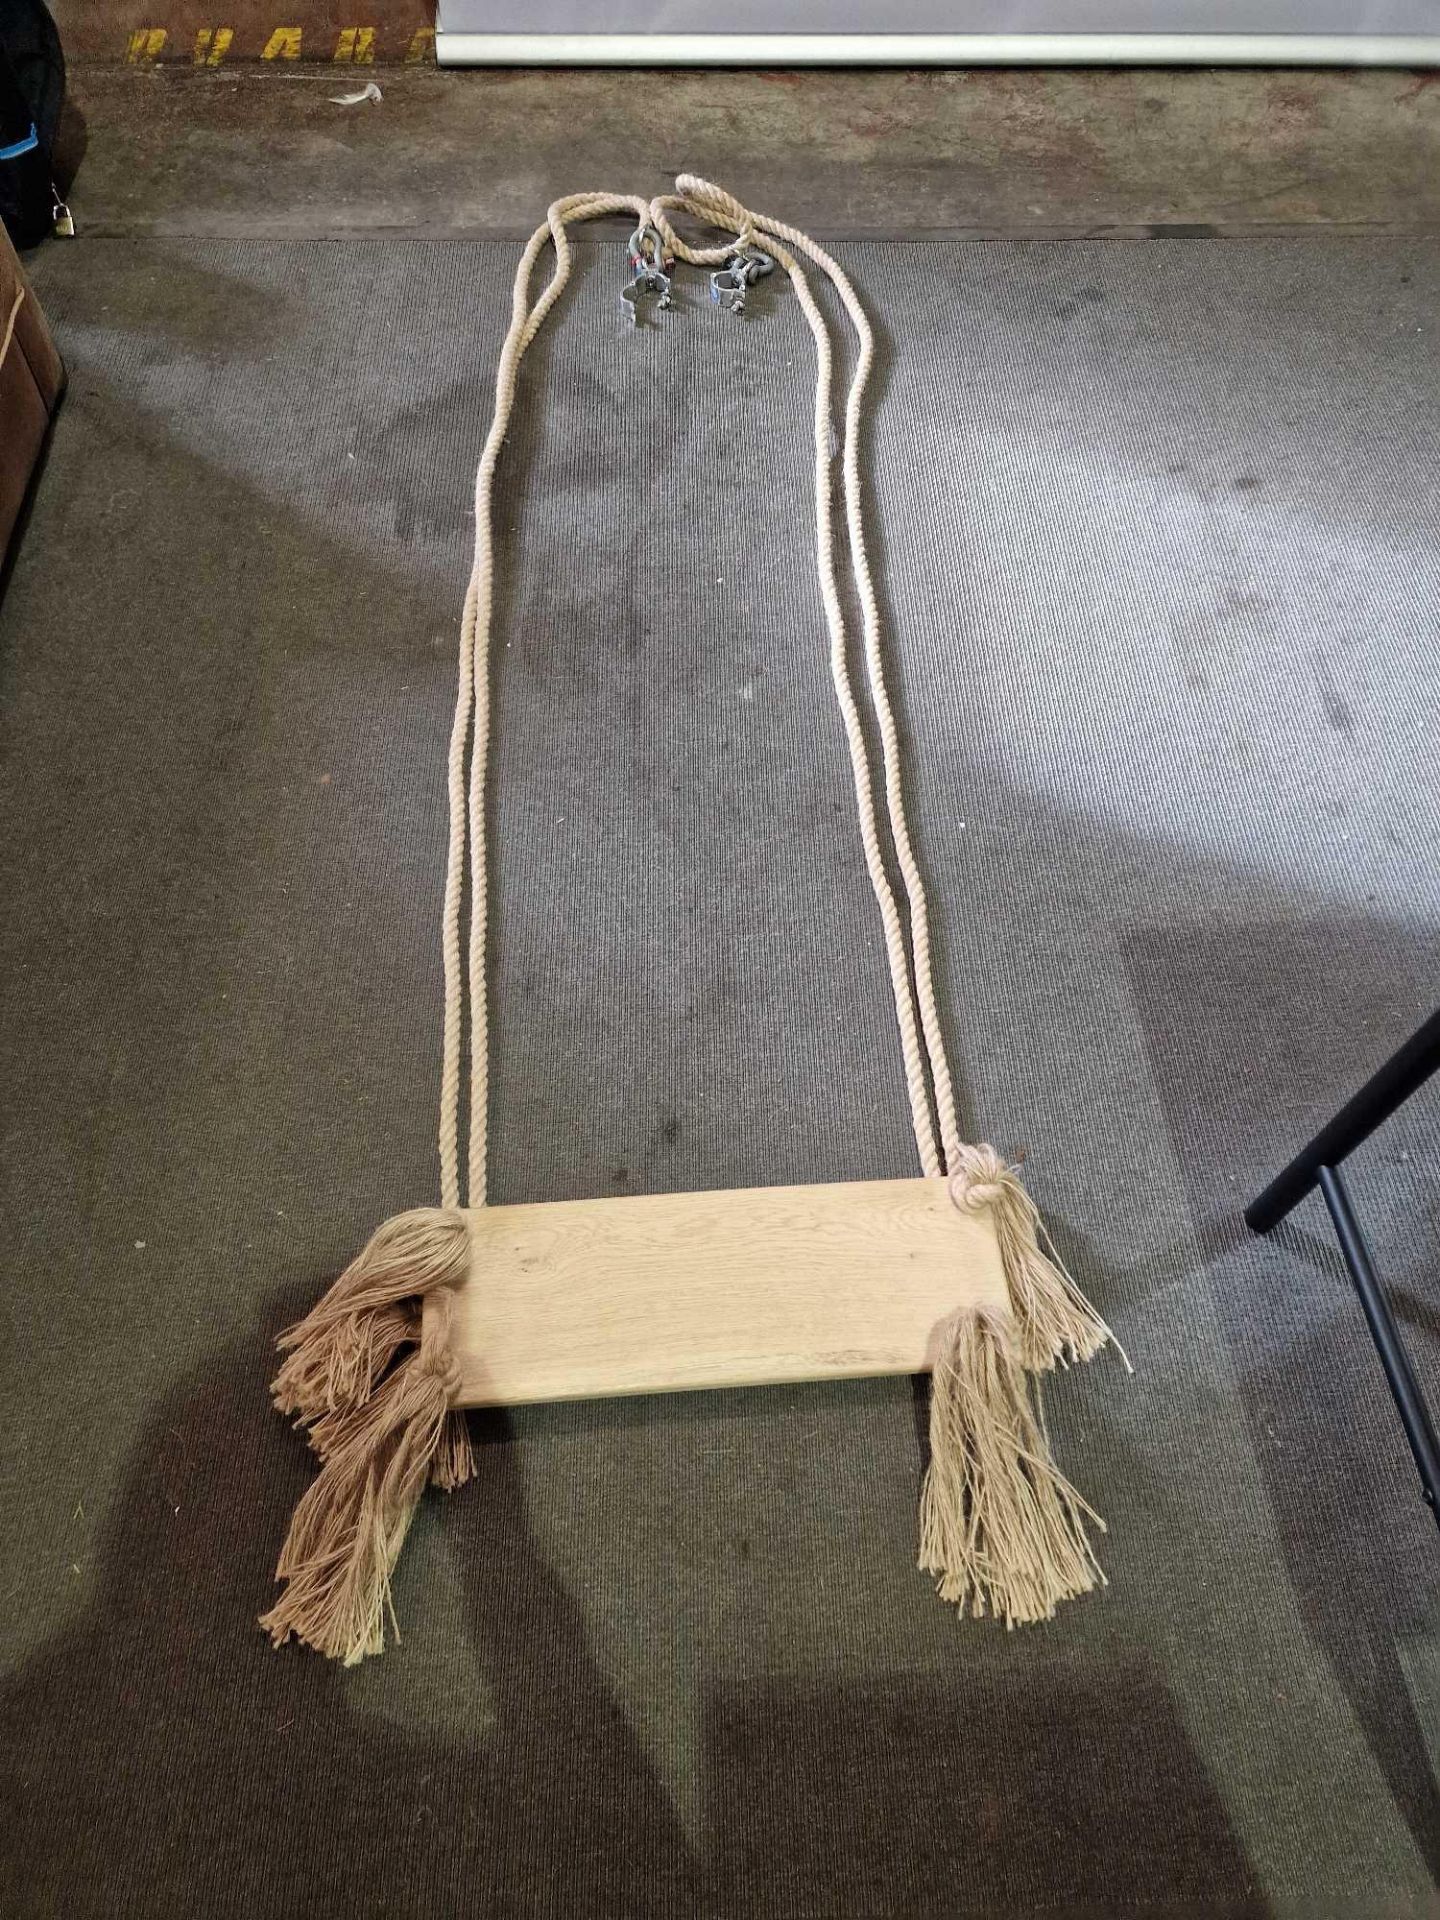 2 x Medium Wooden Rope Swing 60 x 20 x 3cm Thick Natural Rope Product Complete With Clamps And - Bild 2 aus 3